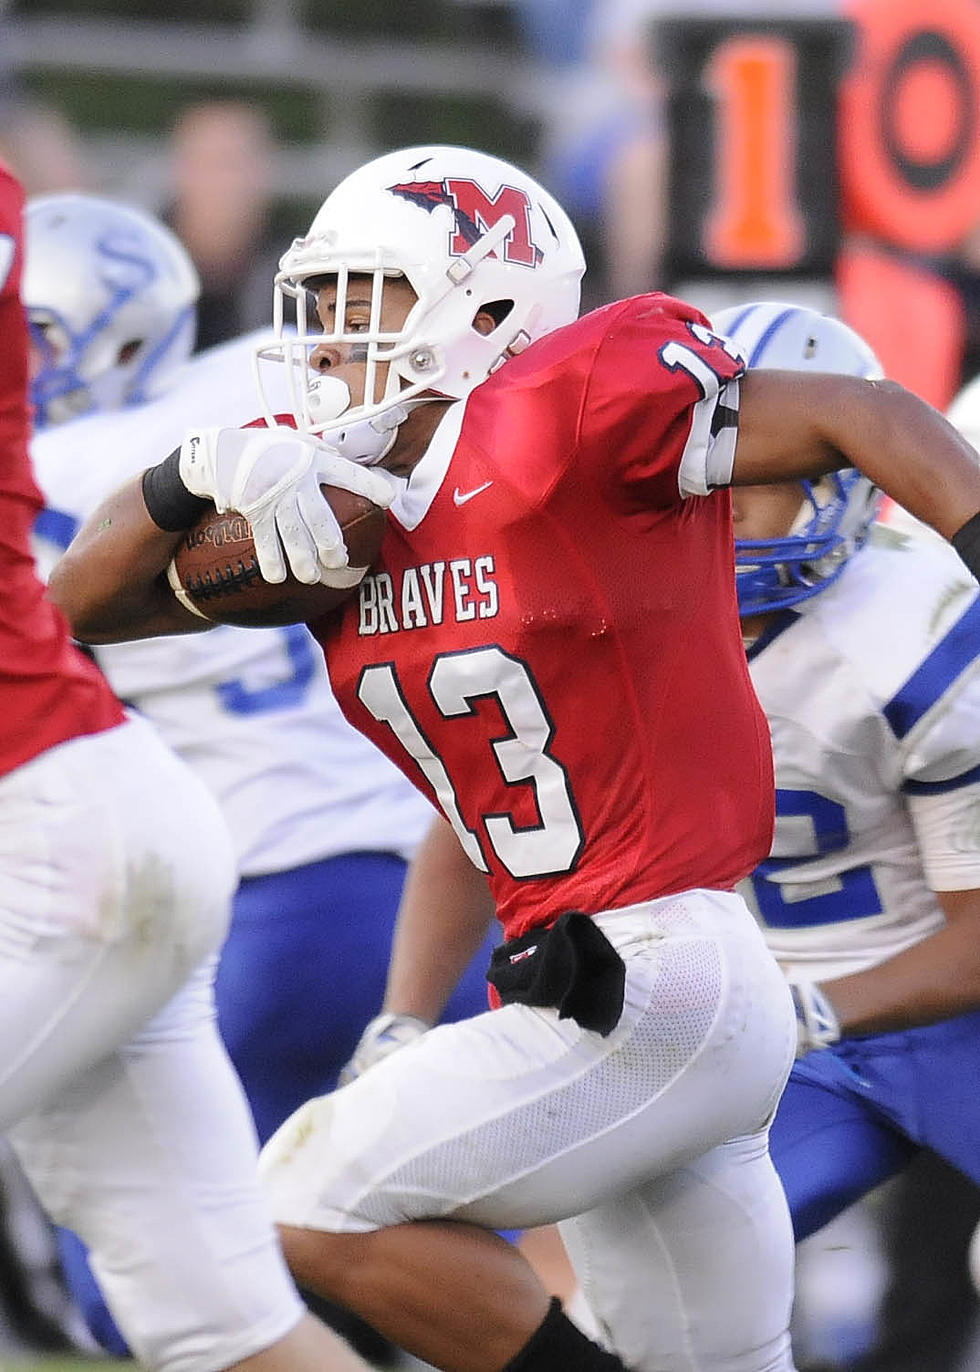 Manalapan Thrashes Sayreville With Record-Setting Performance